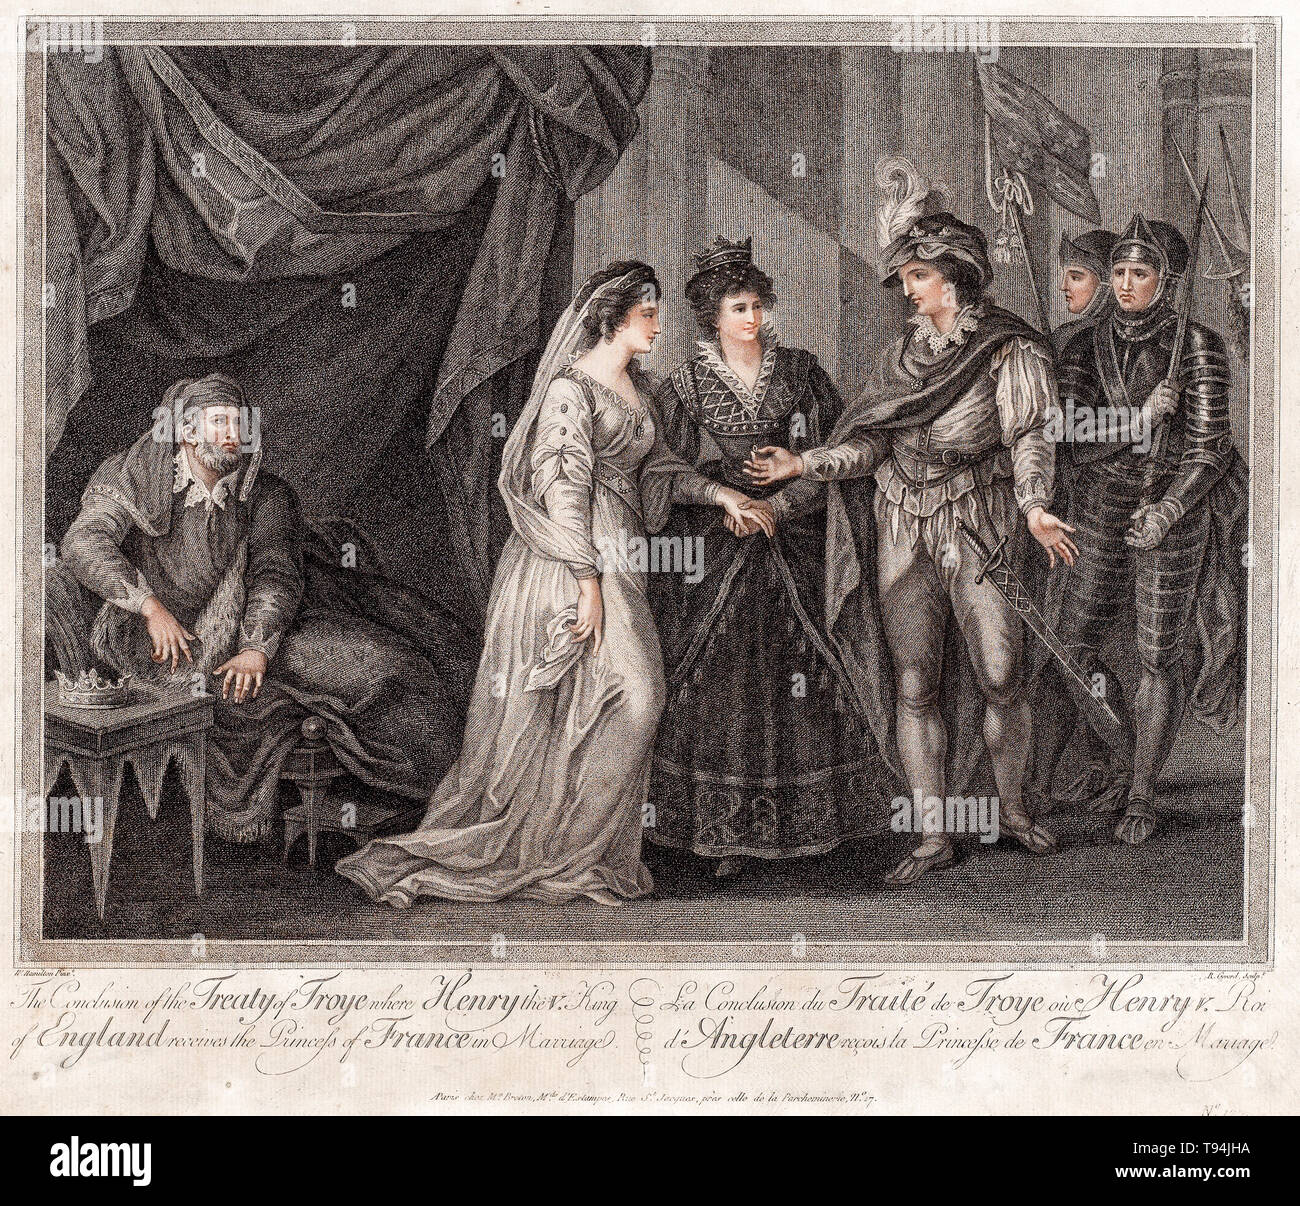 The Conclusion of the Treaty of Troyes, Henry V, King of England, Receives the introduction of Catherine of Valois in Marriage,1788 Stock Photo